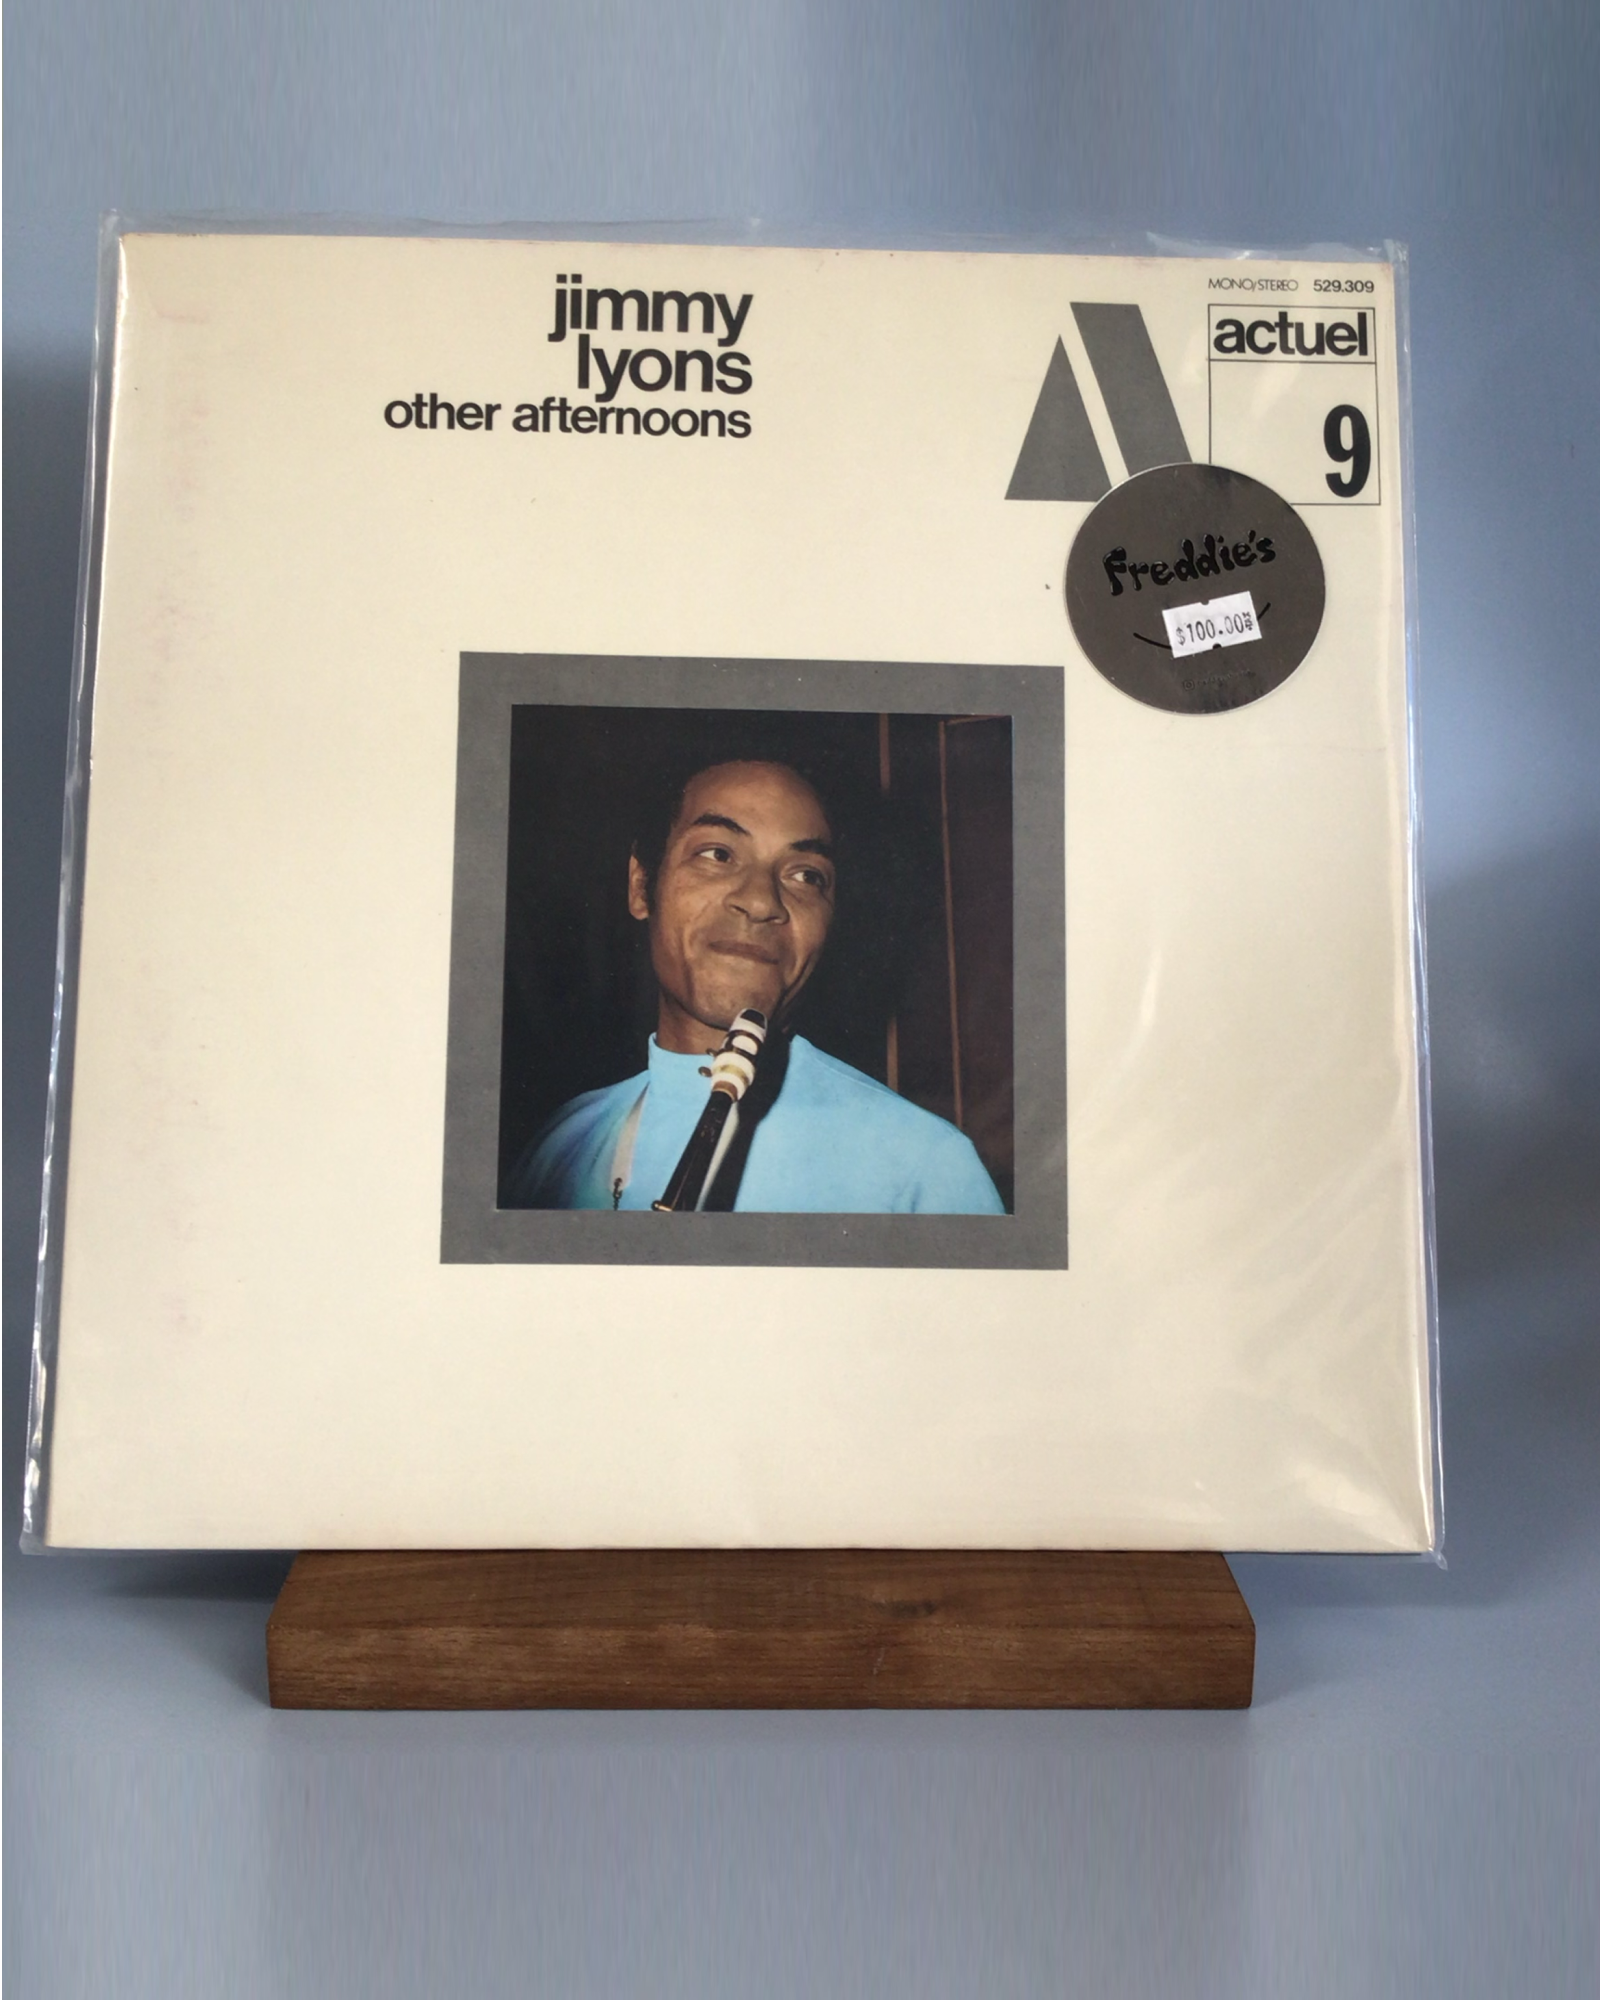 Jimmy Lyons - Other Afternoons Actuel 9 - BYG Records 529.309 NM LP